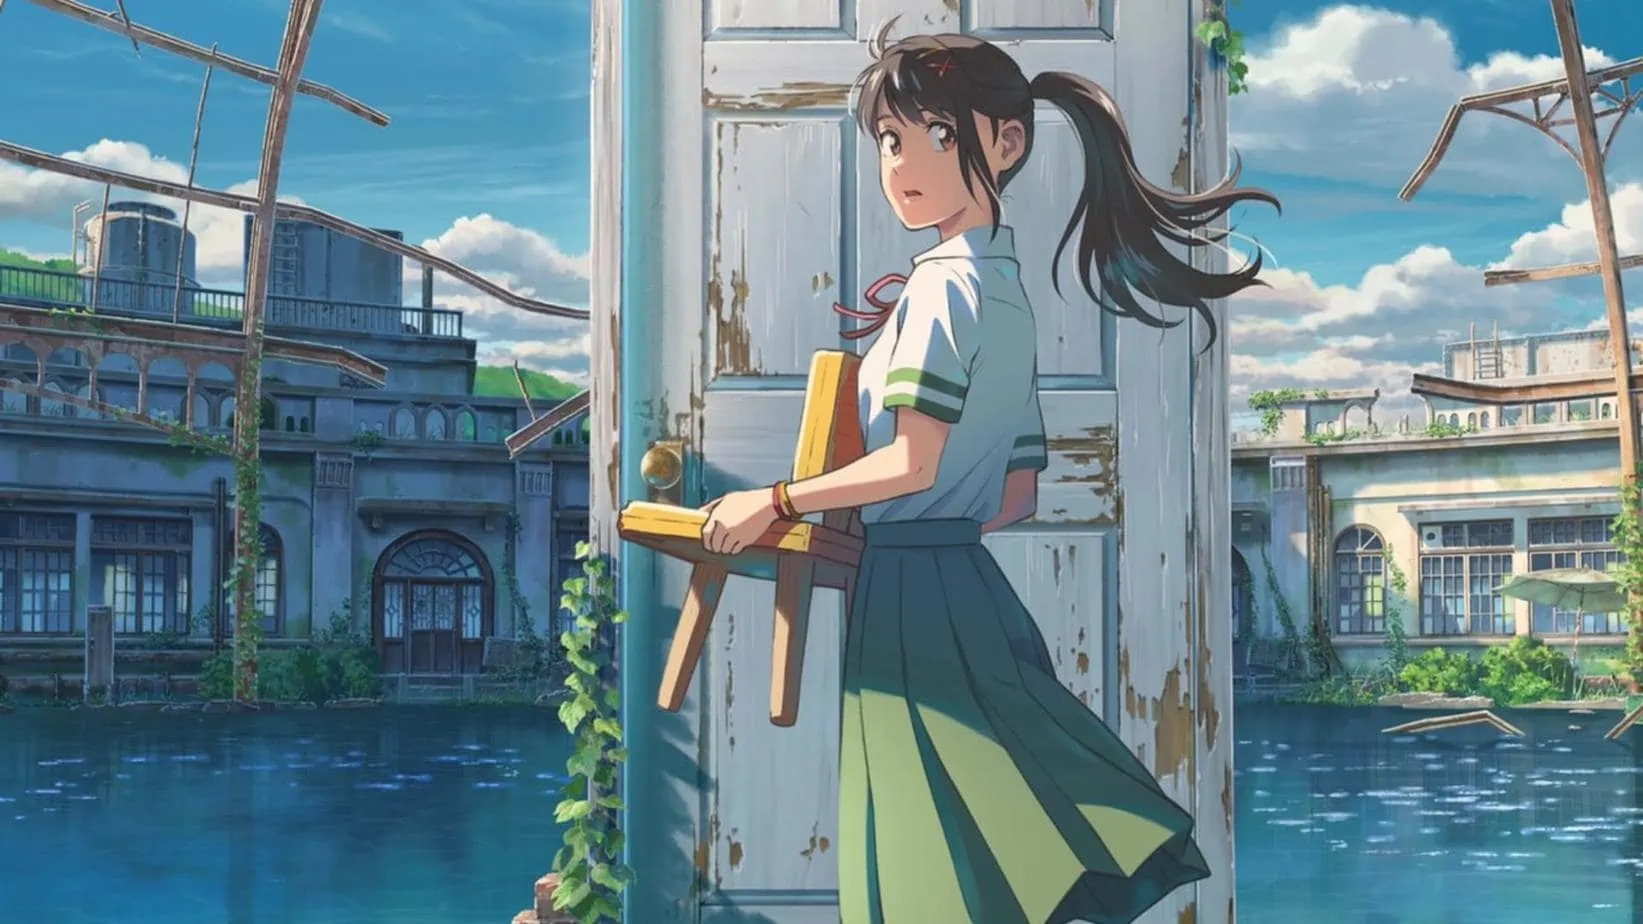 Suzume no Tojimari Becomes 4th Highest-Grossing Anime Film of All